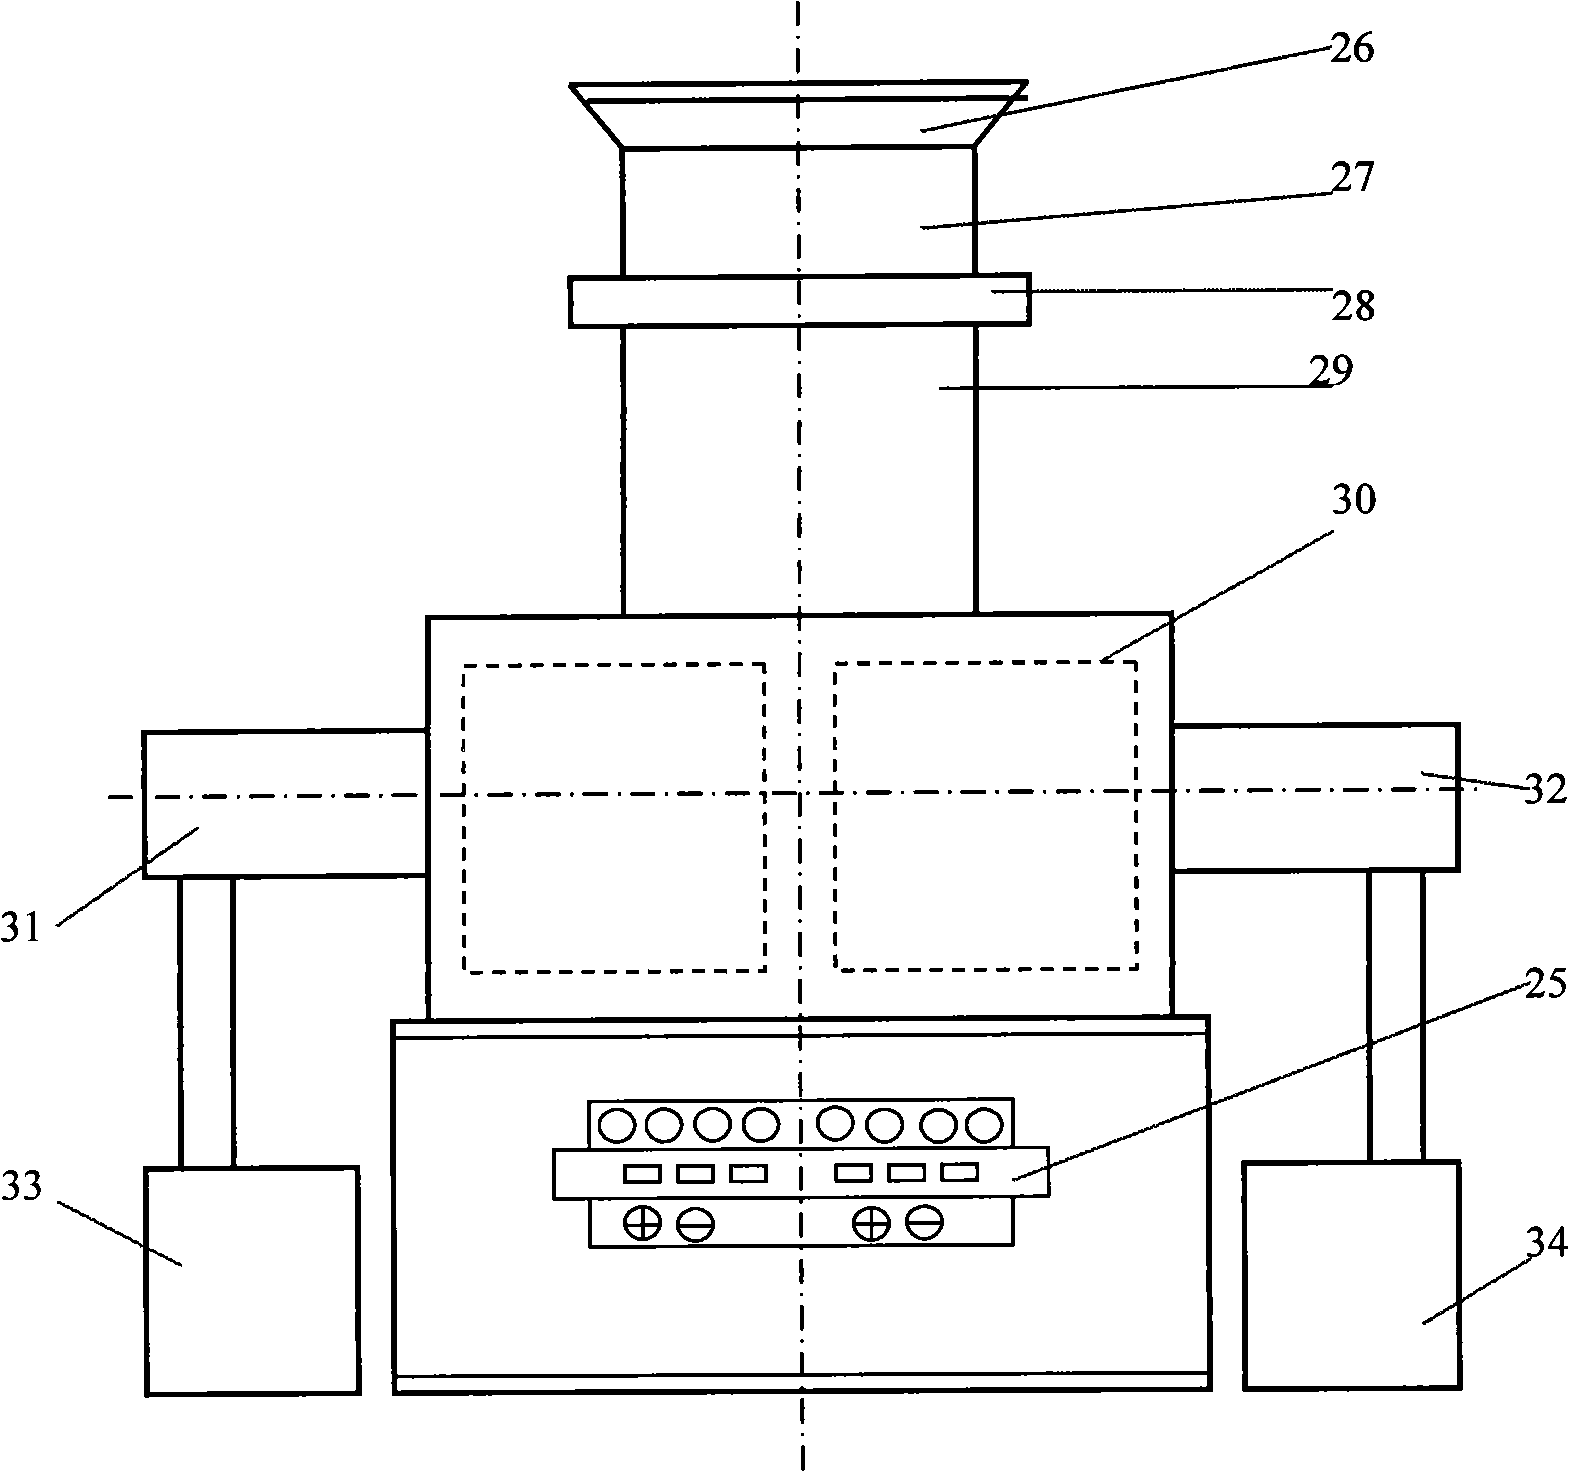 Microwave heating, solid state reduction and gaseous dephosphorization method for manganese ore powder